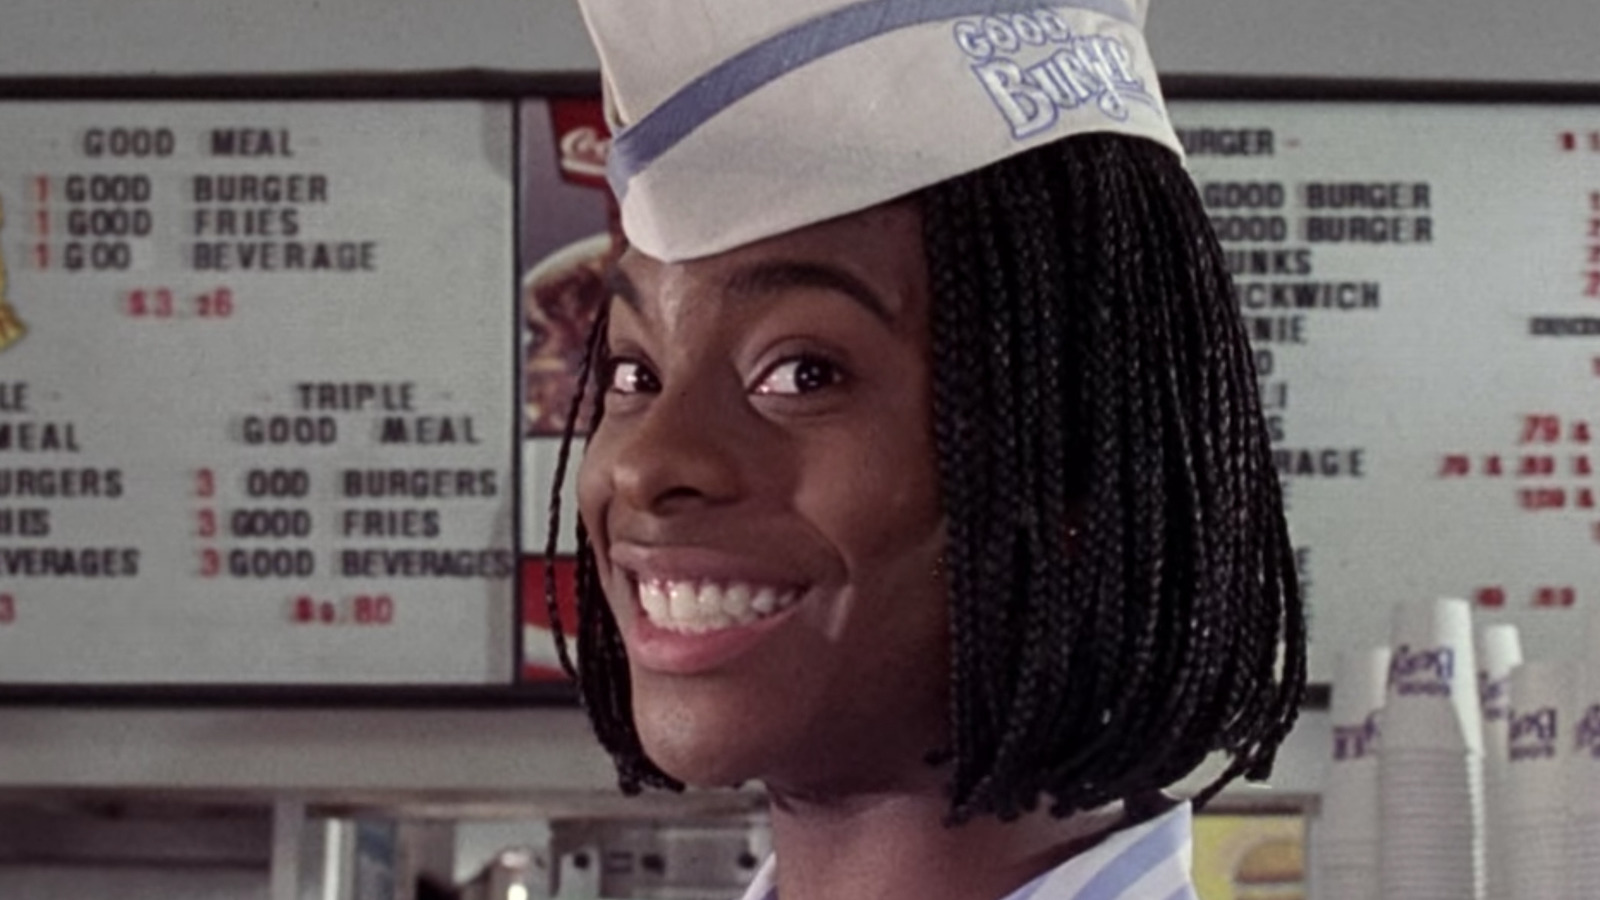 11 Things You Didn't Know About Good Burger